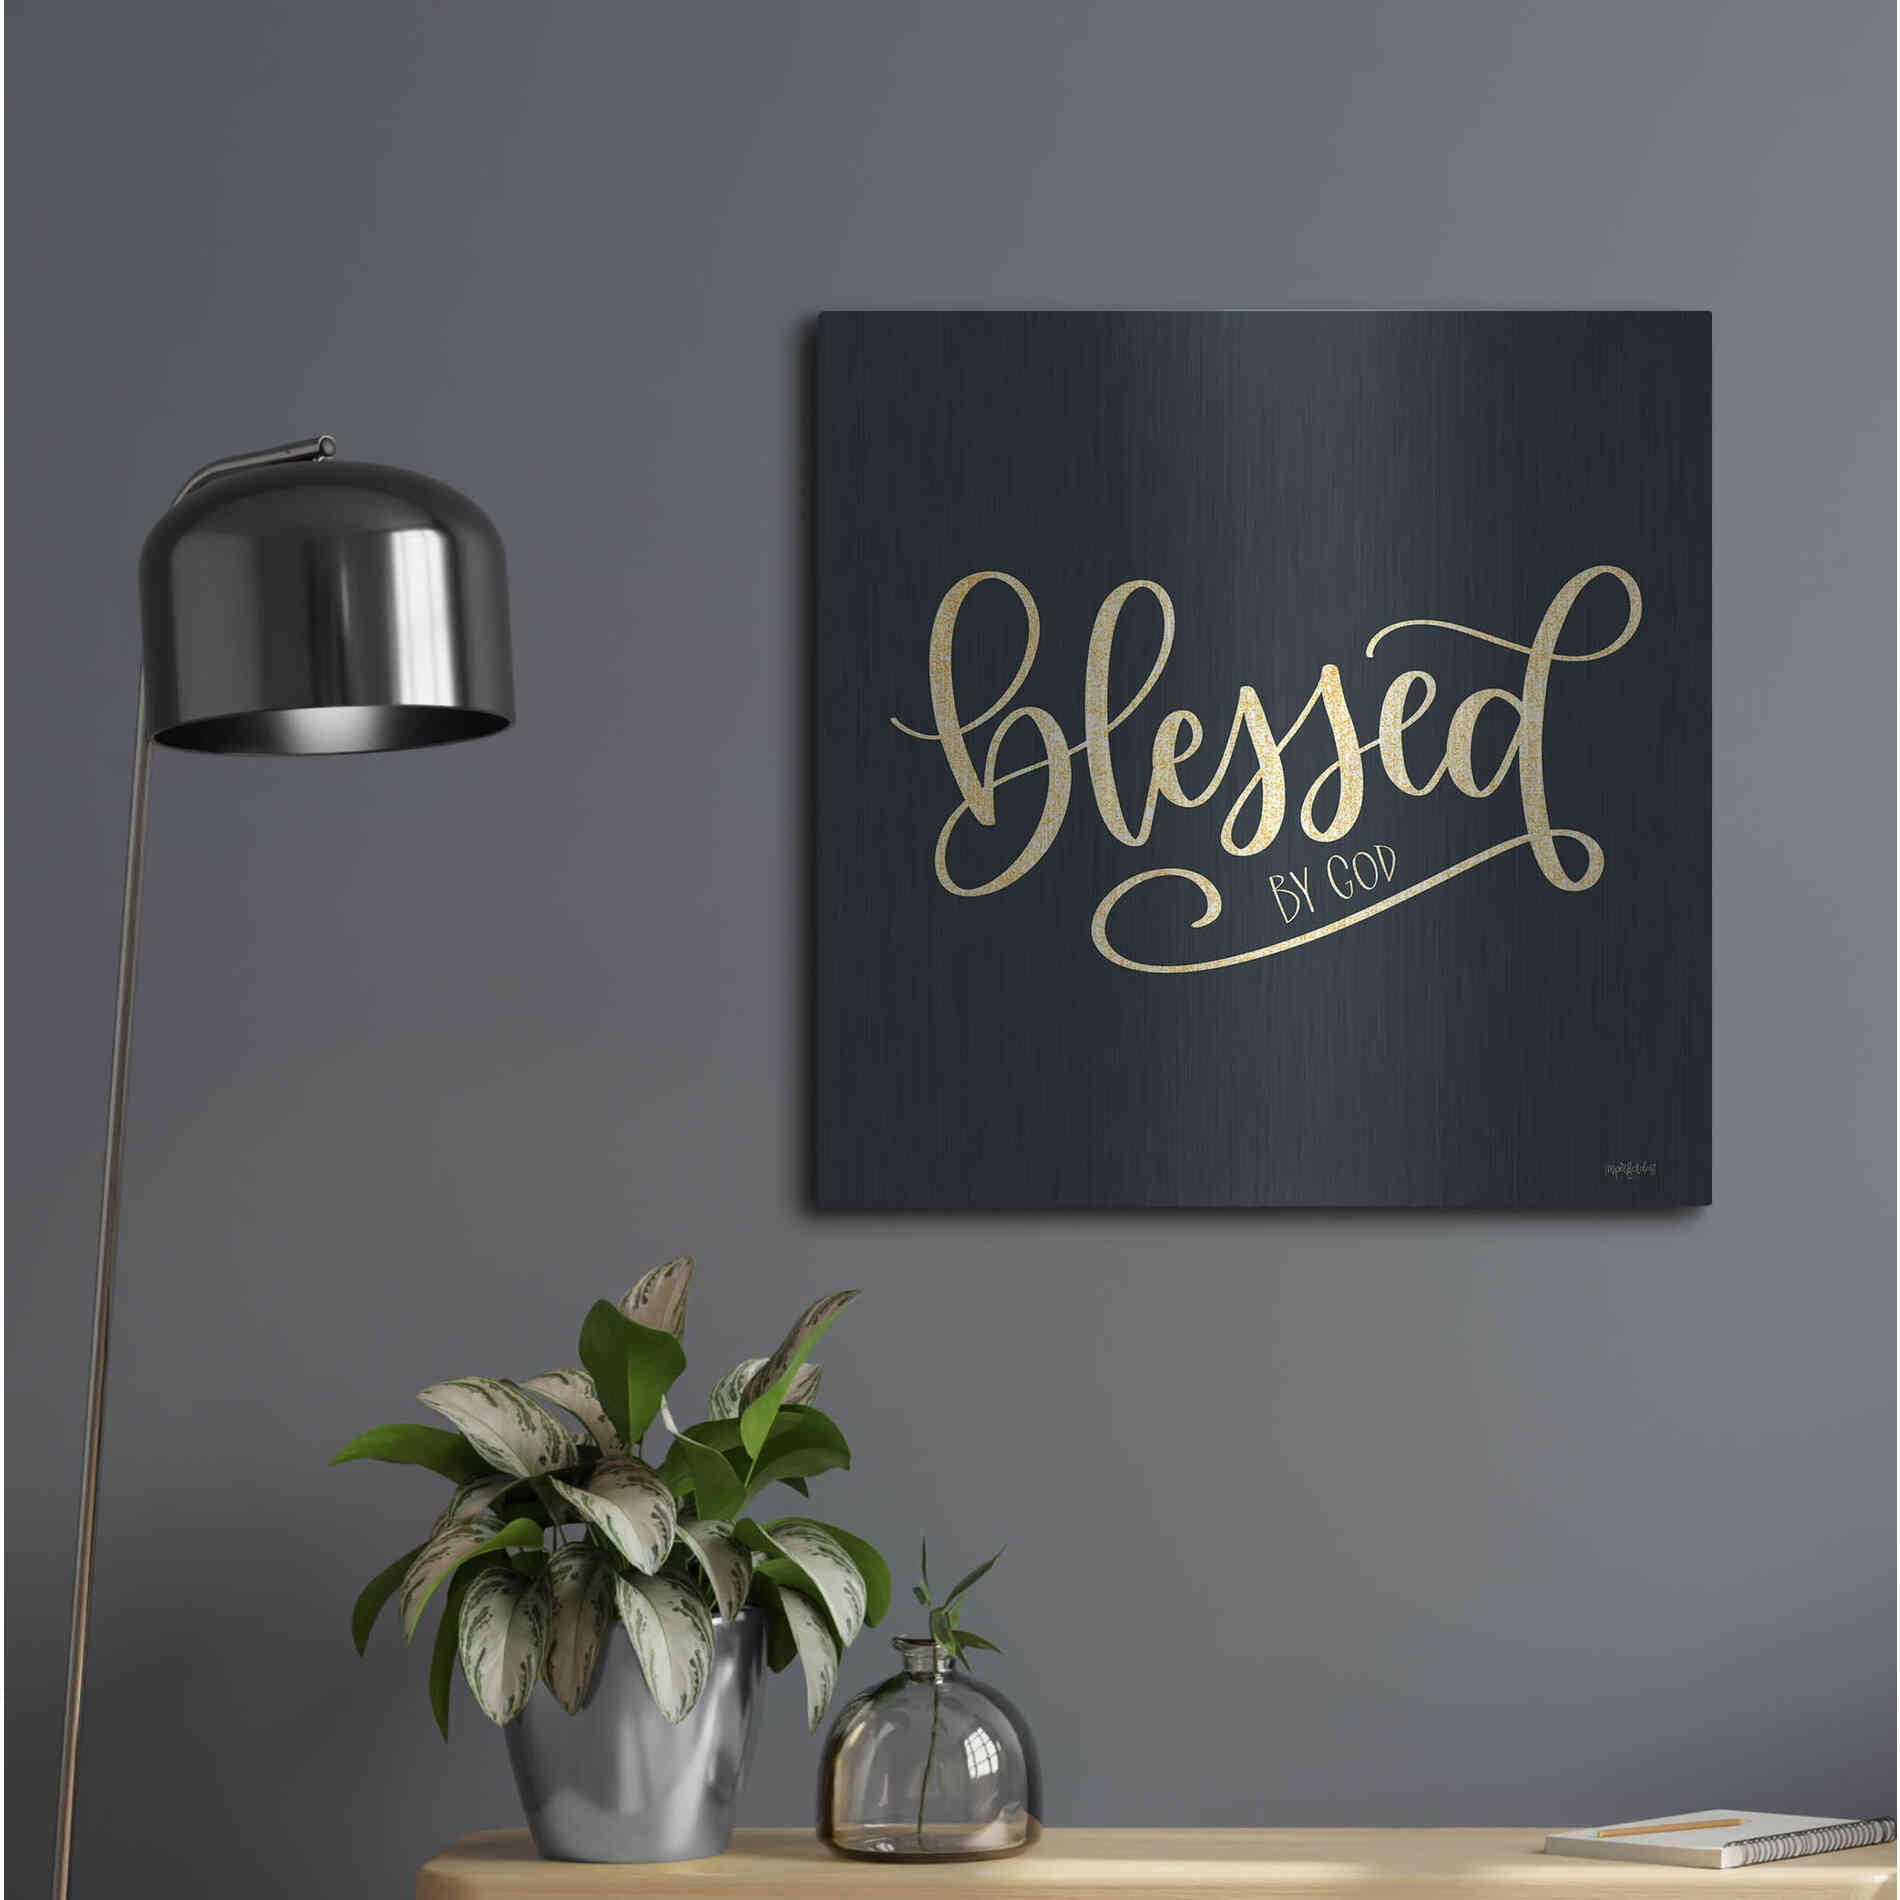 Luxe Metal Art 'Blessed By God' by Imperfect Dust, Metal Wall Art,24x24